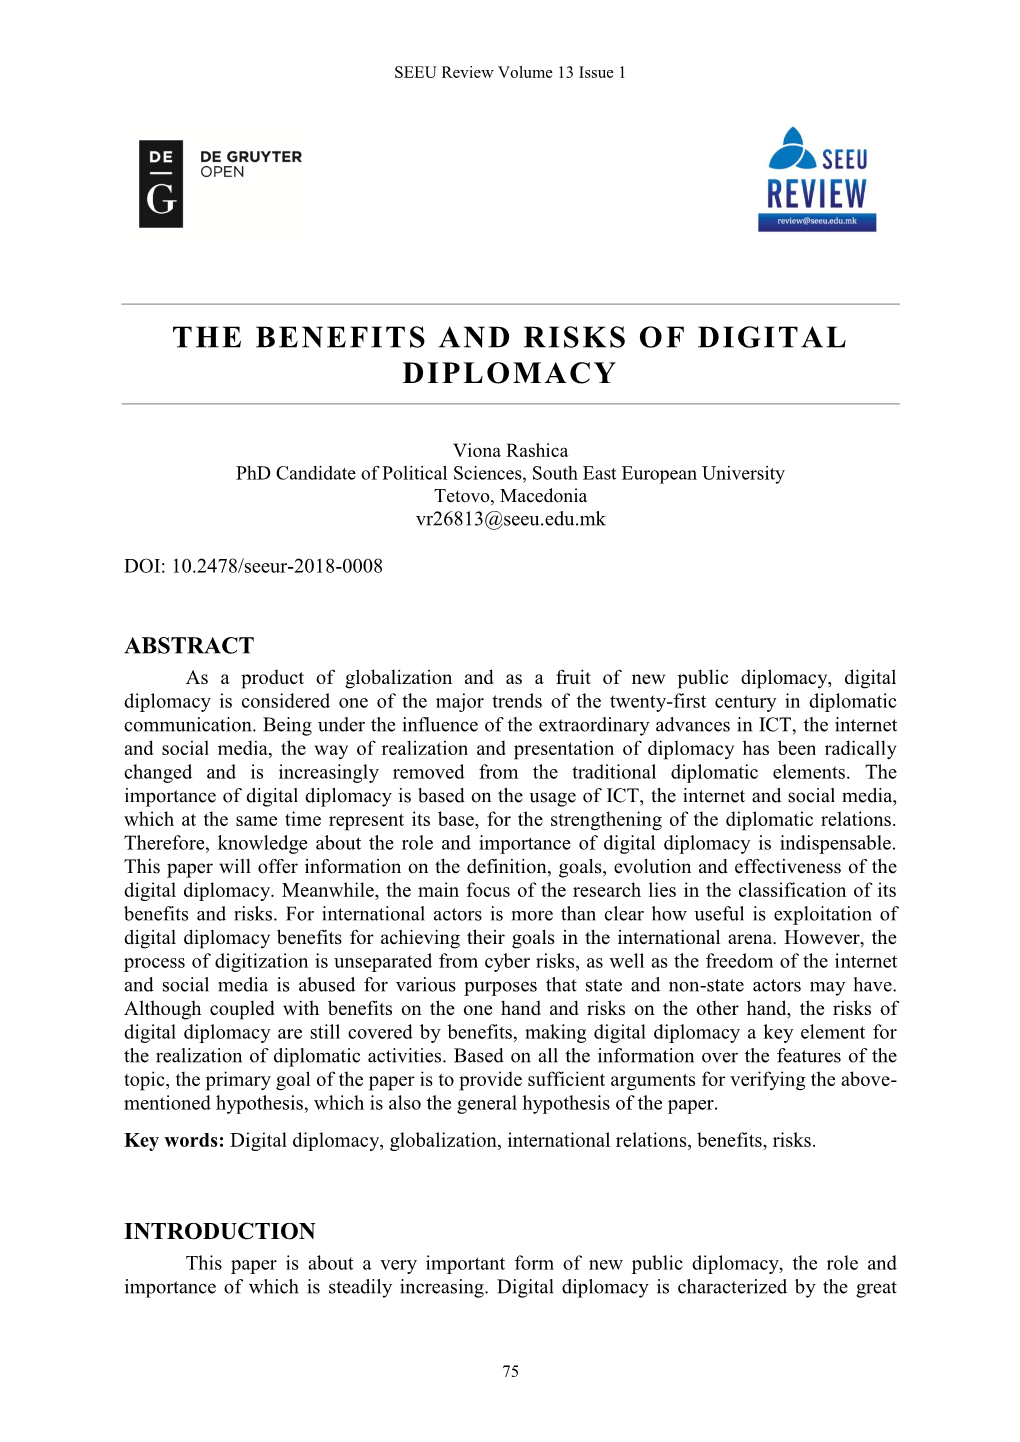 The Benefits and Risks of Digital Diplomacy